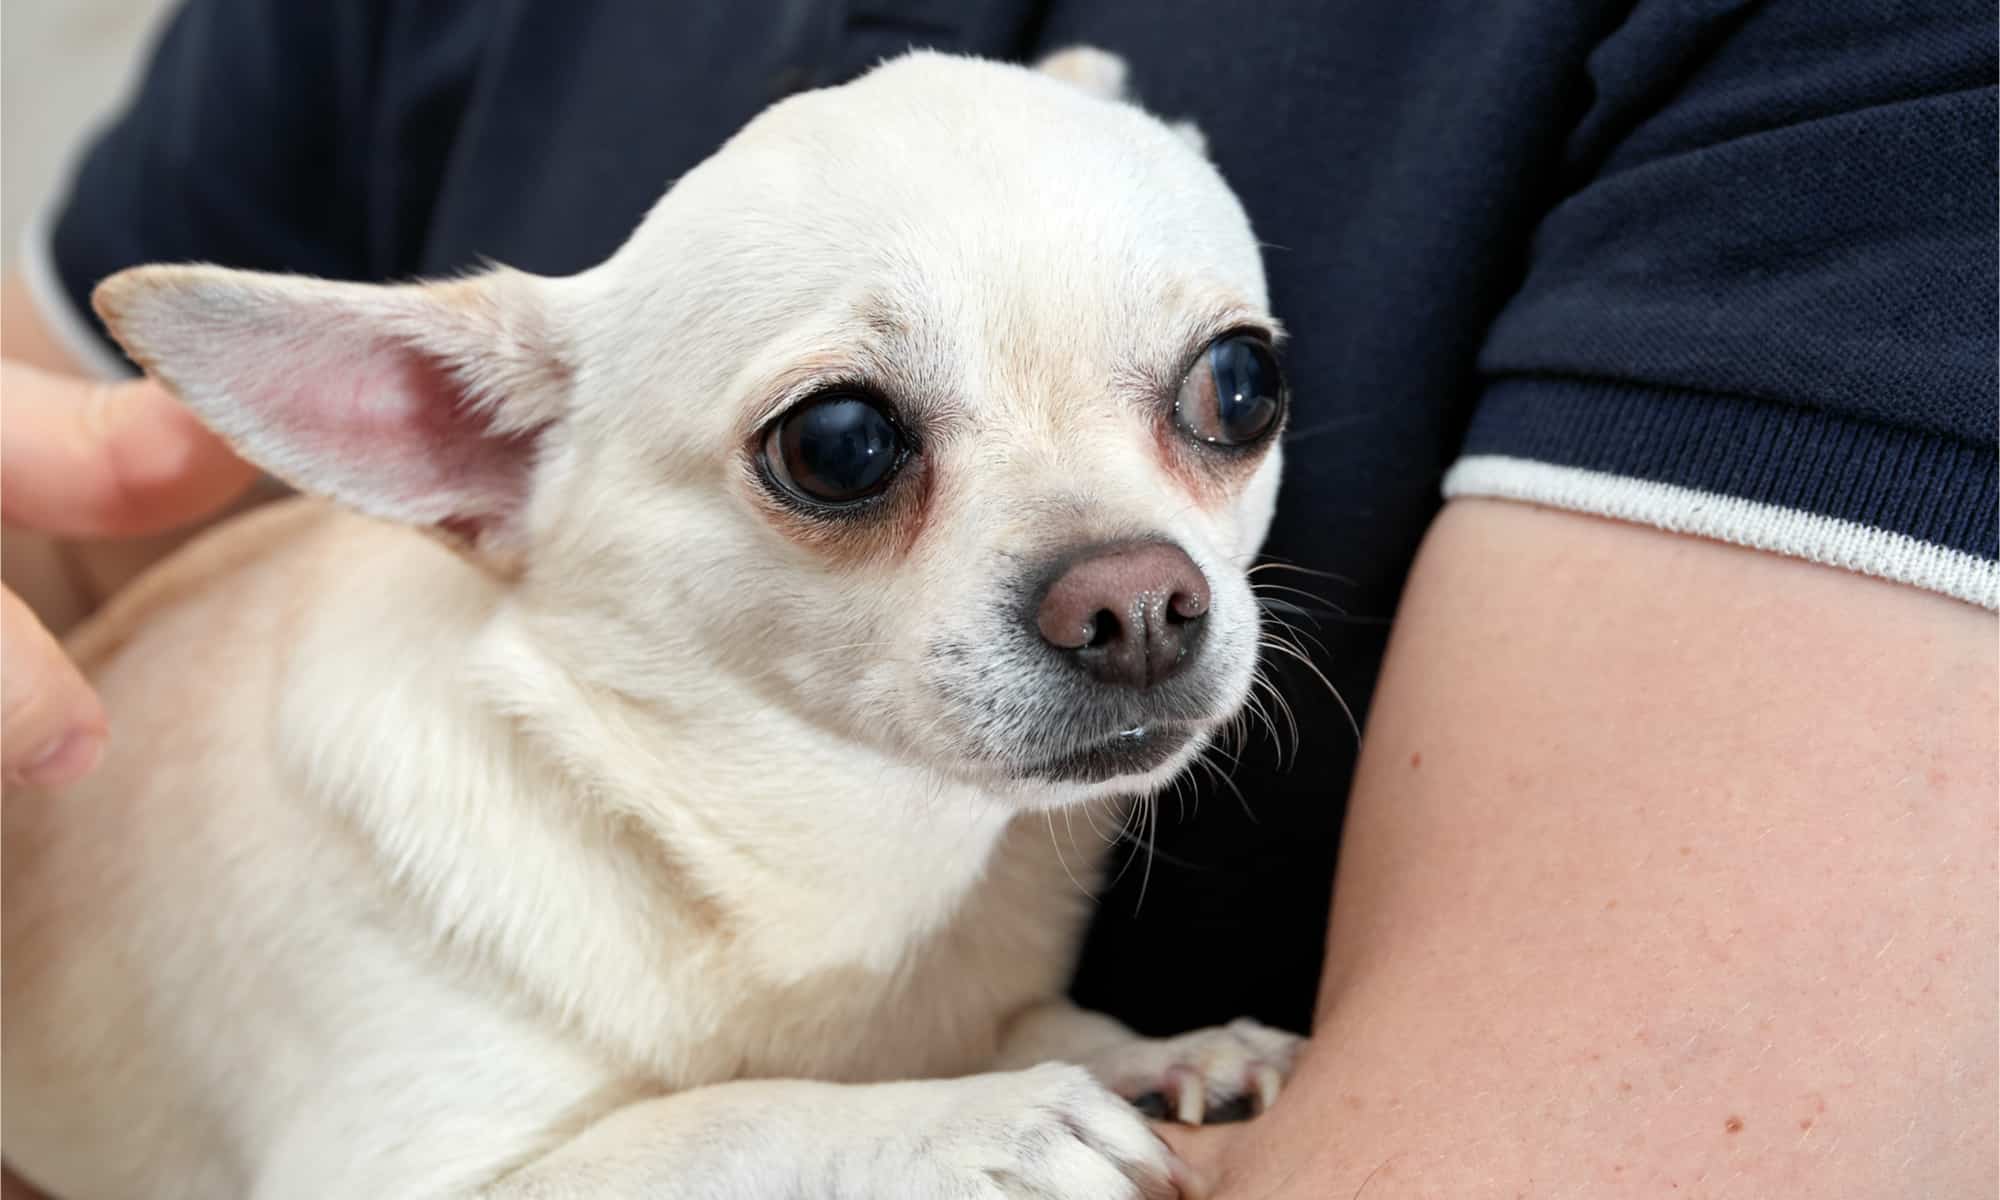 A shite chihuahua in it's owner's arms